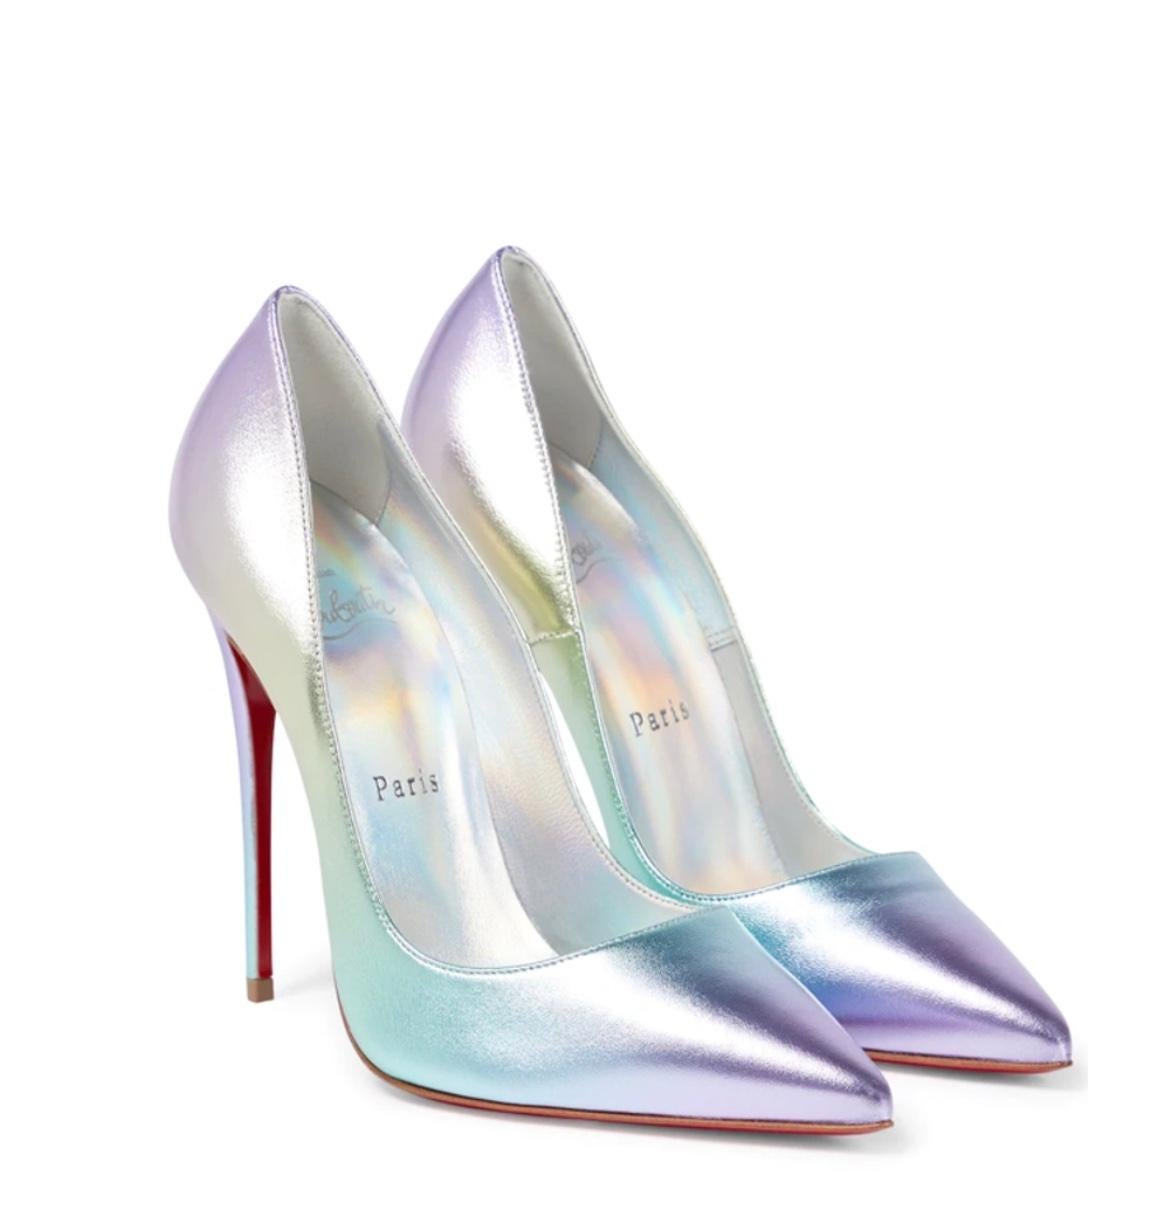 Gray Christian Louboutin So Kate 120 Iridescent Leather Pump Sz 37 For Sale